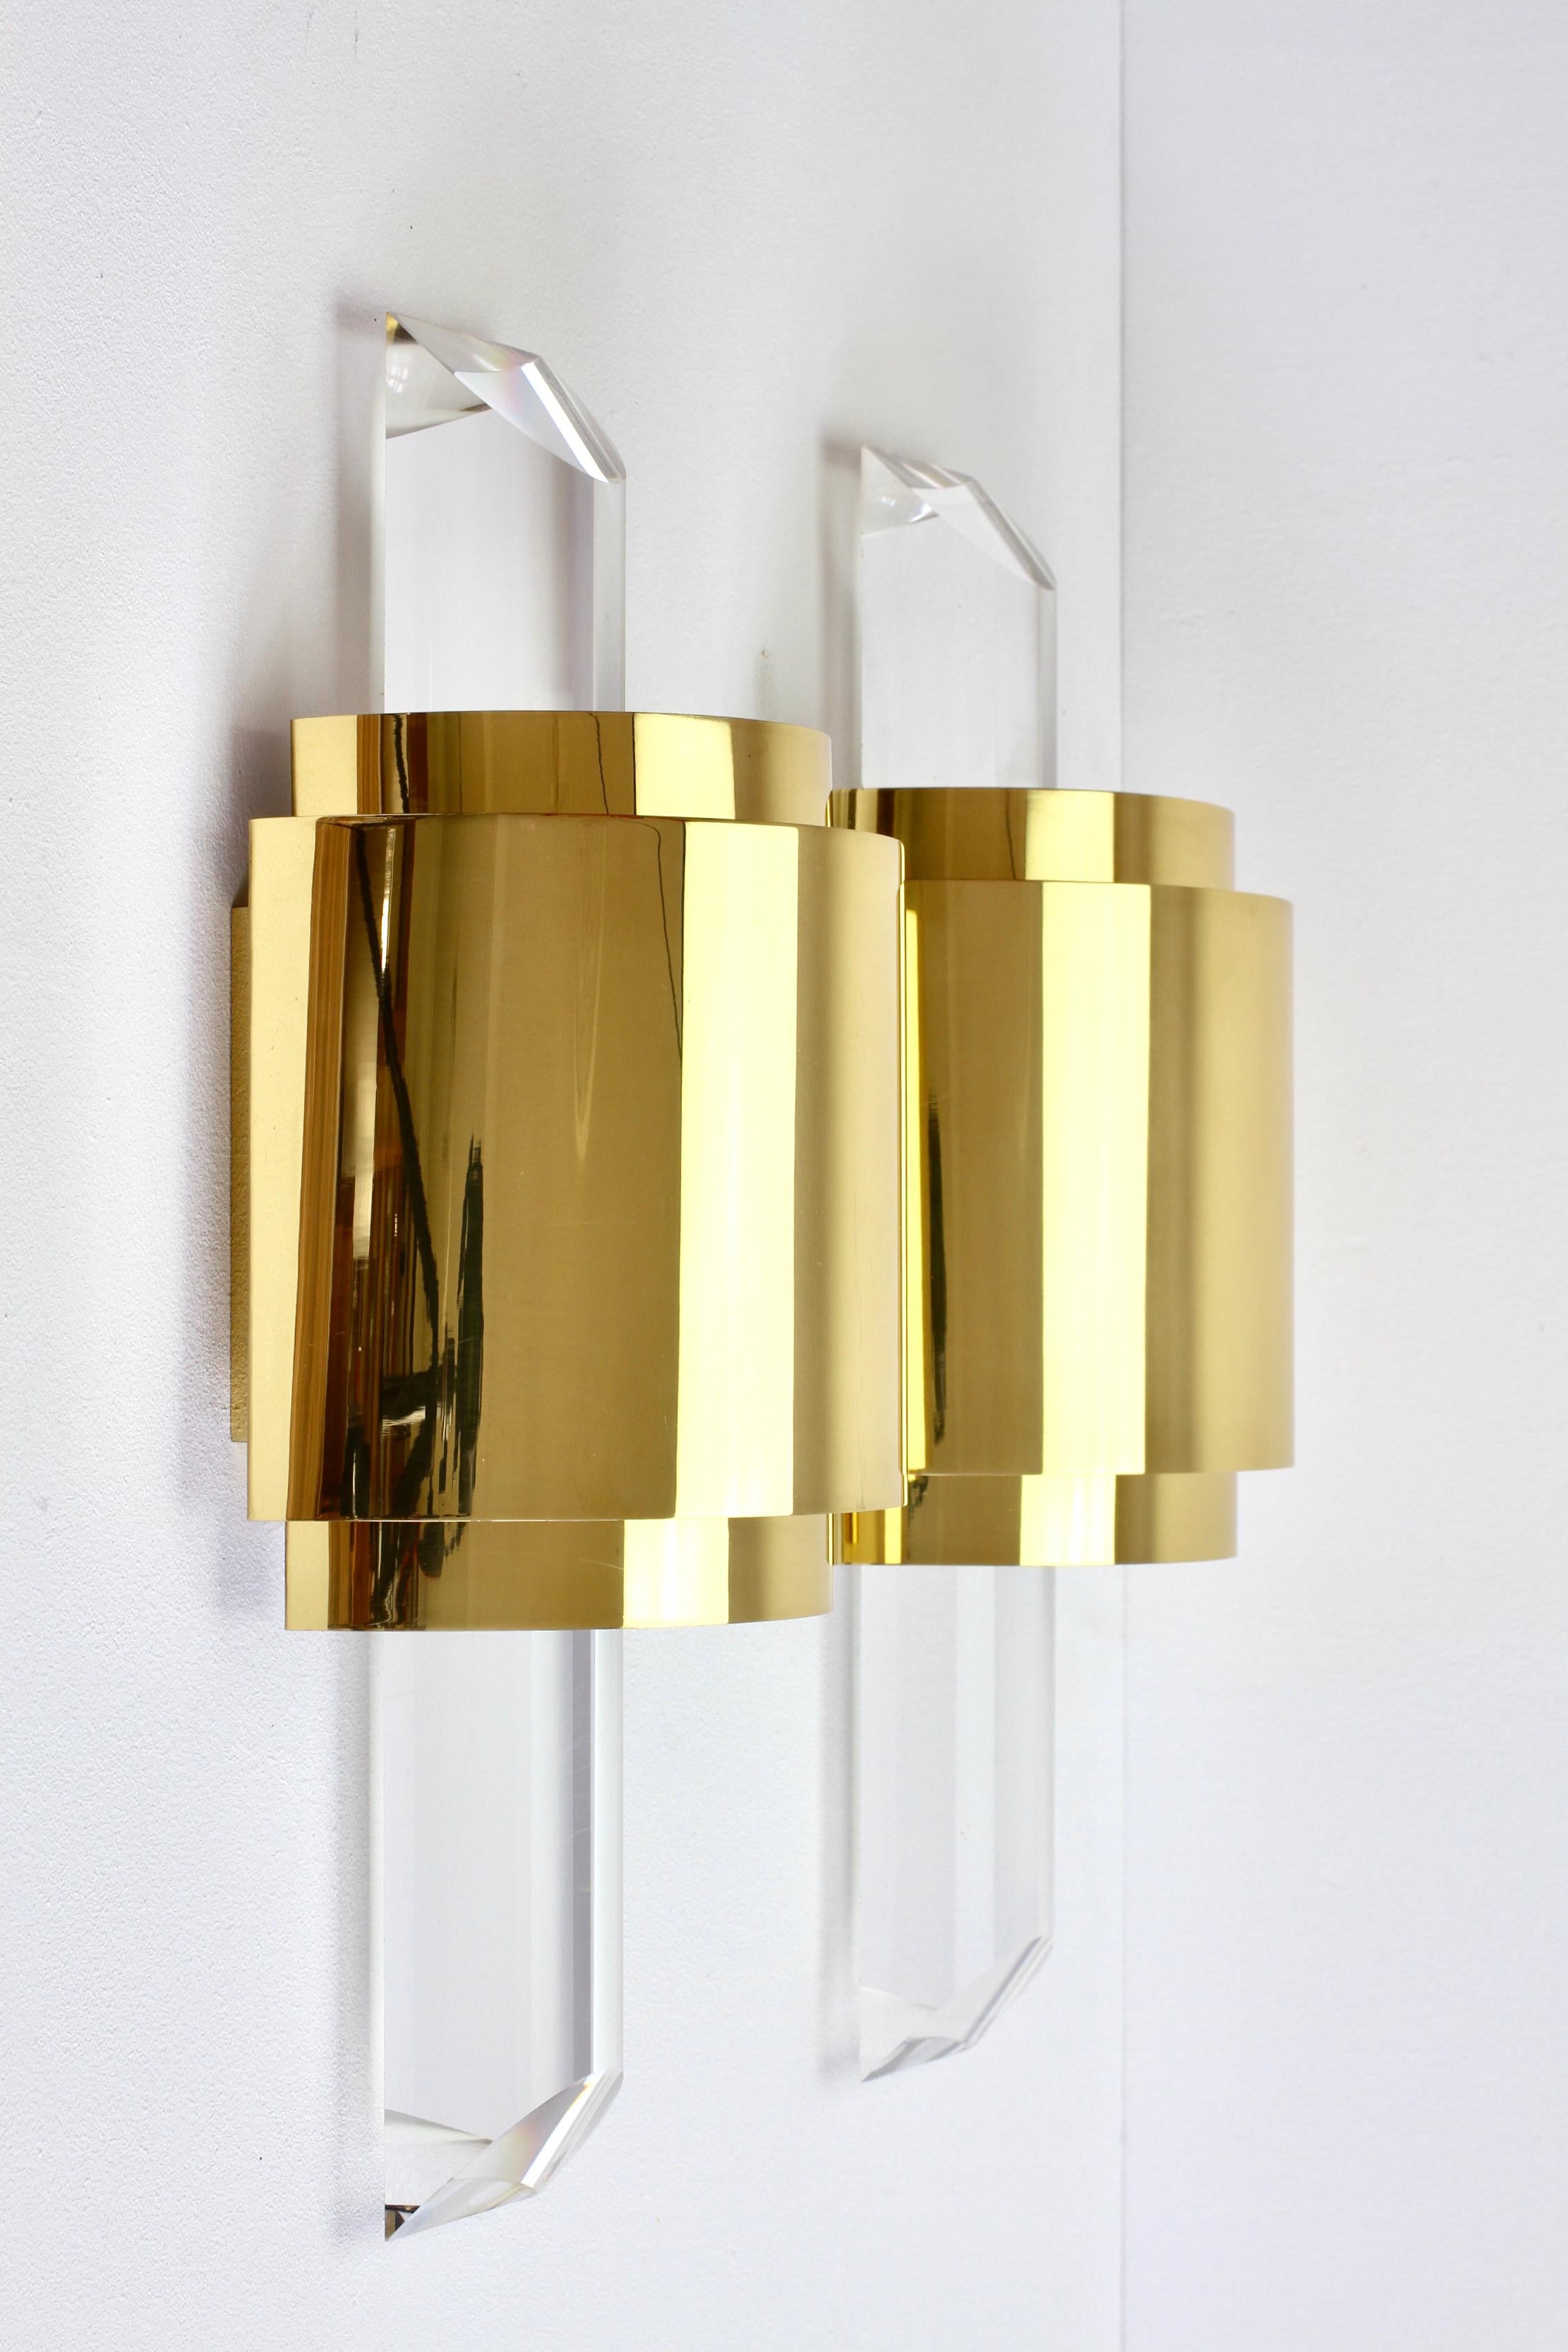 Large Hollywood Regency Lucite and Brass Wall Lights or Sconces, circa 1970s For Sale 8